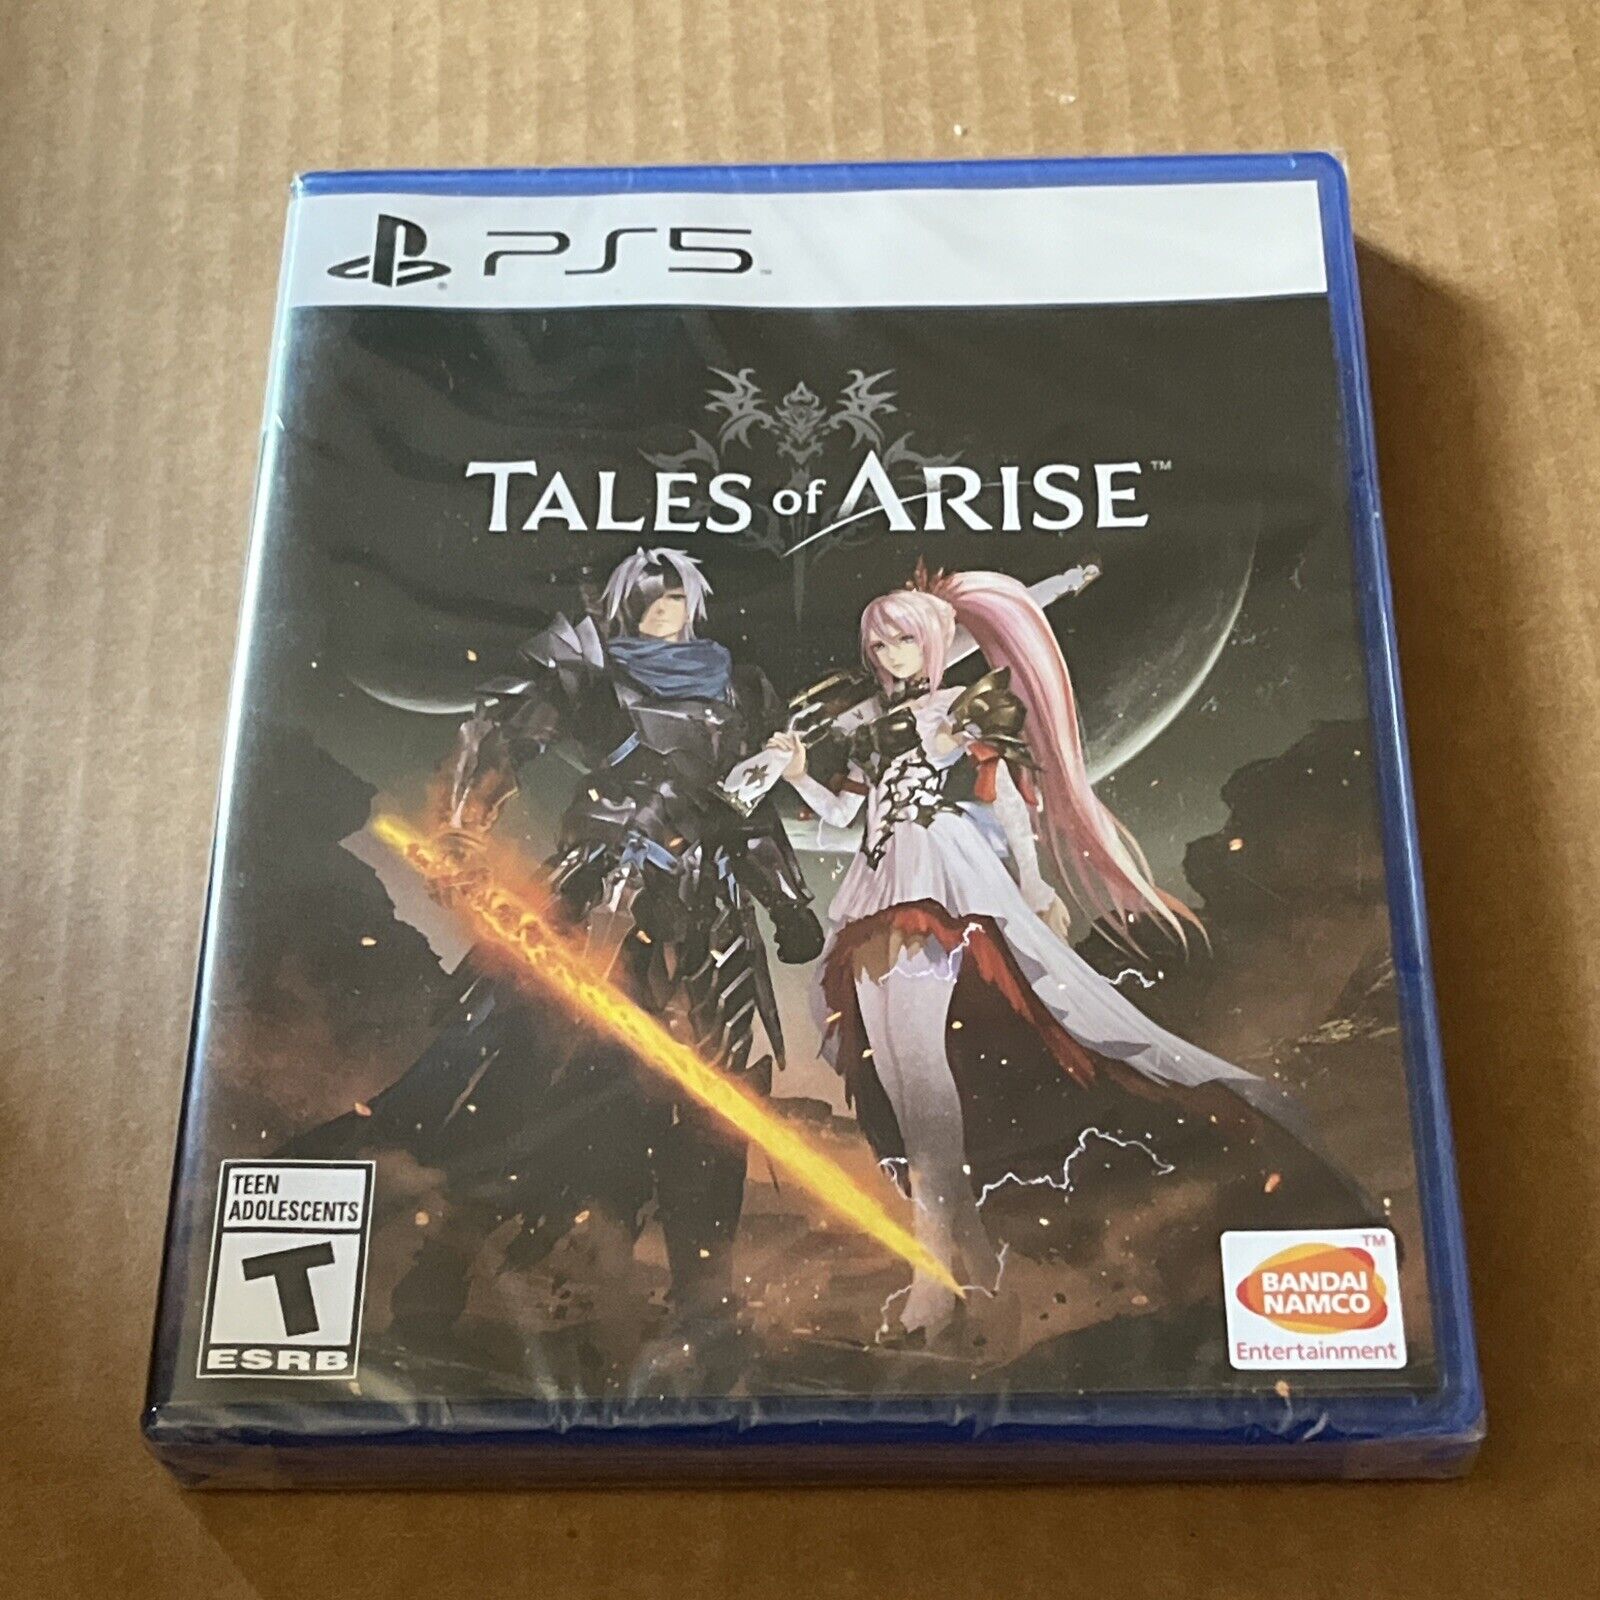 Interesting Tales of Arise – Sony PlayStation 5 PS5 Bandai Namco Game Brand New Sealed on eBay